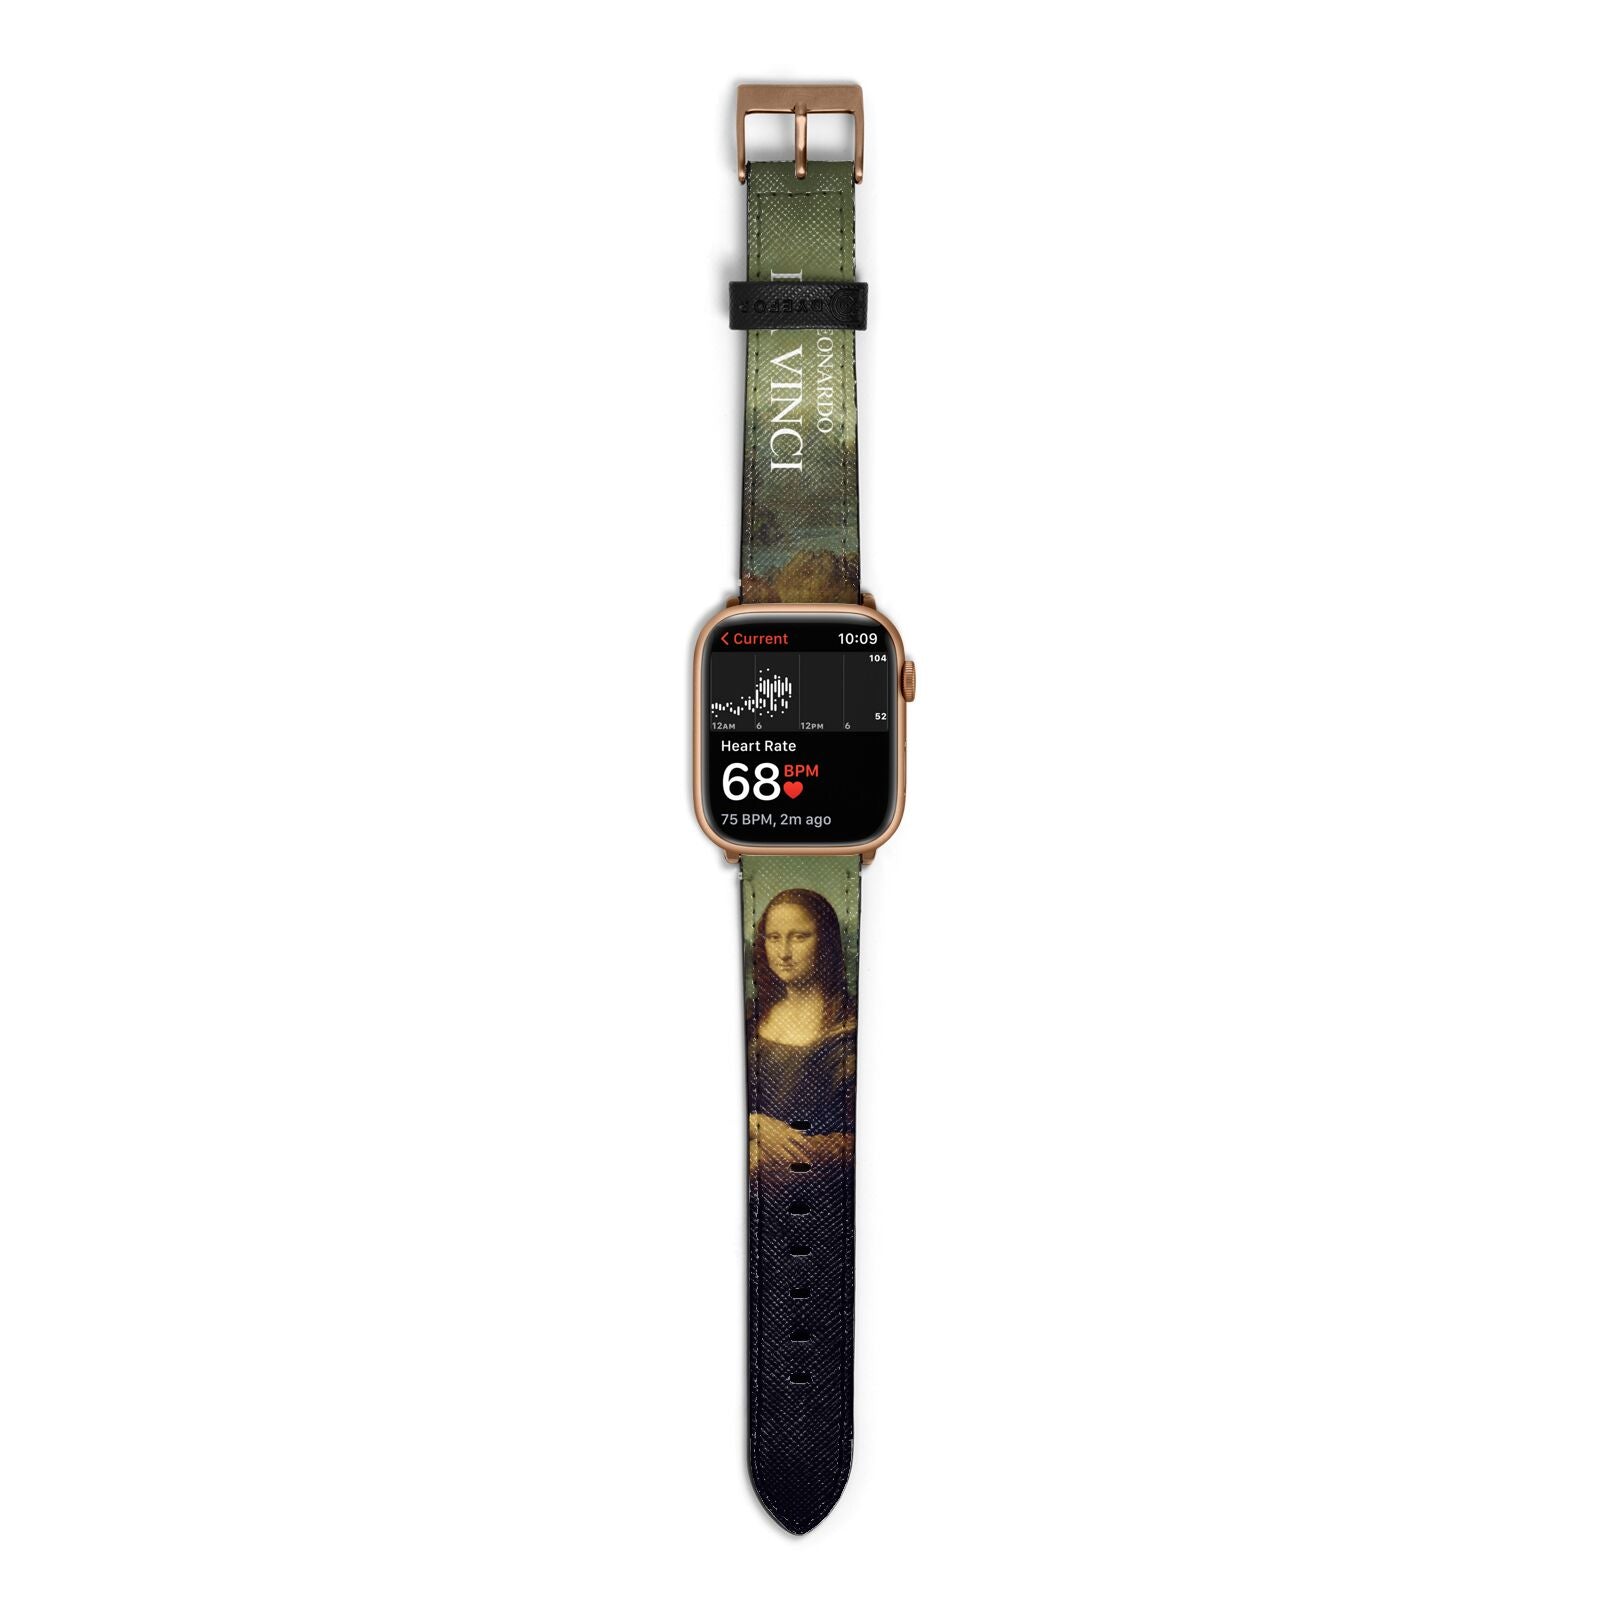 Mona Lisa By Da Vinci Apple Watch Strap Size 38mm with Gold Hardware